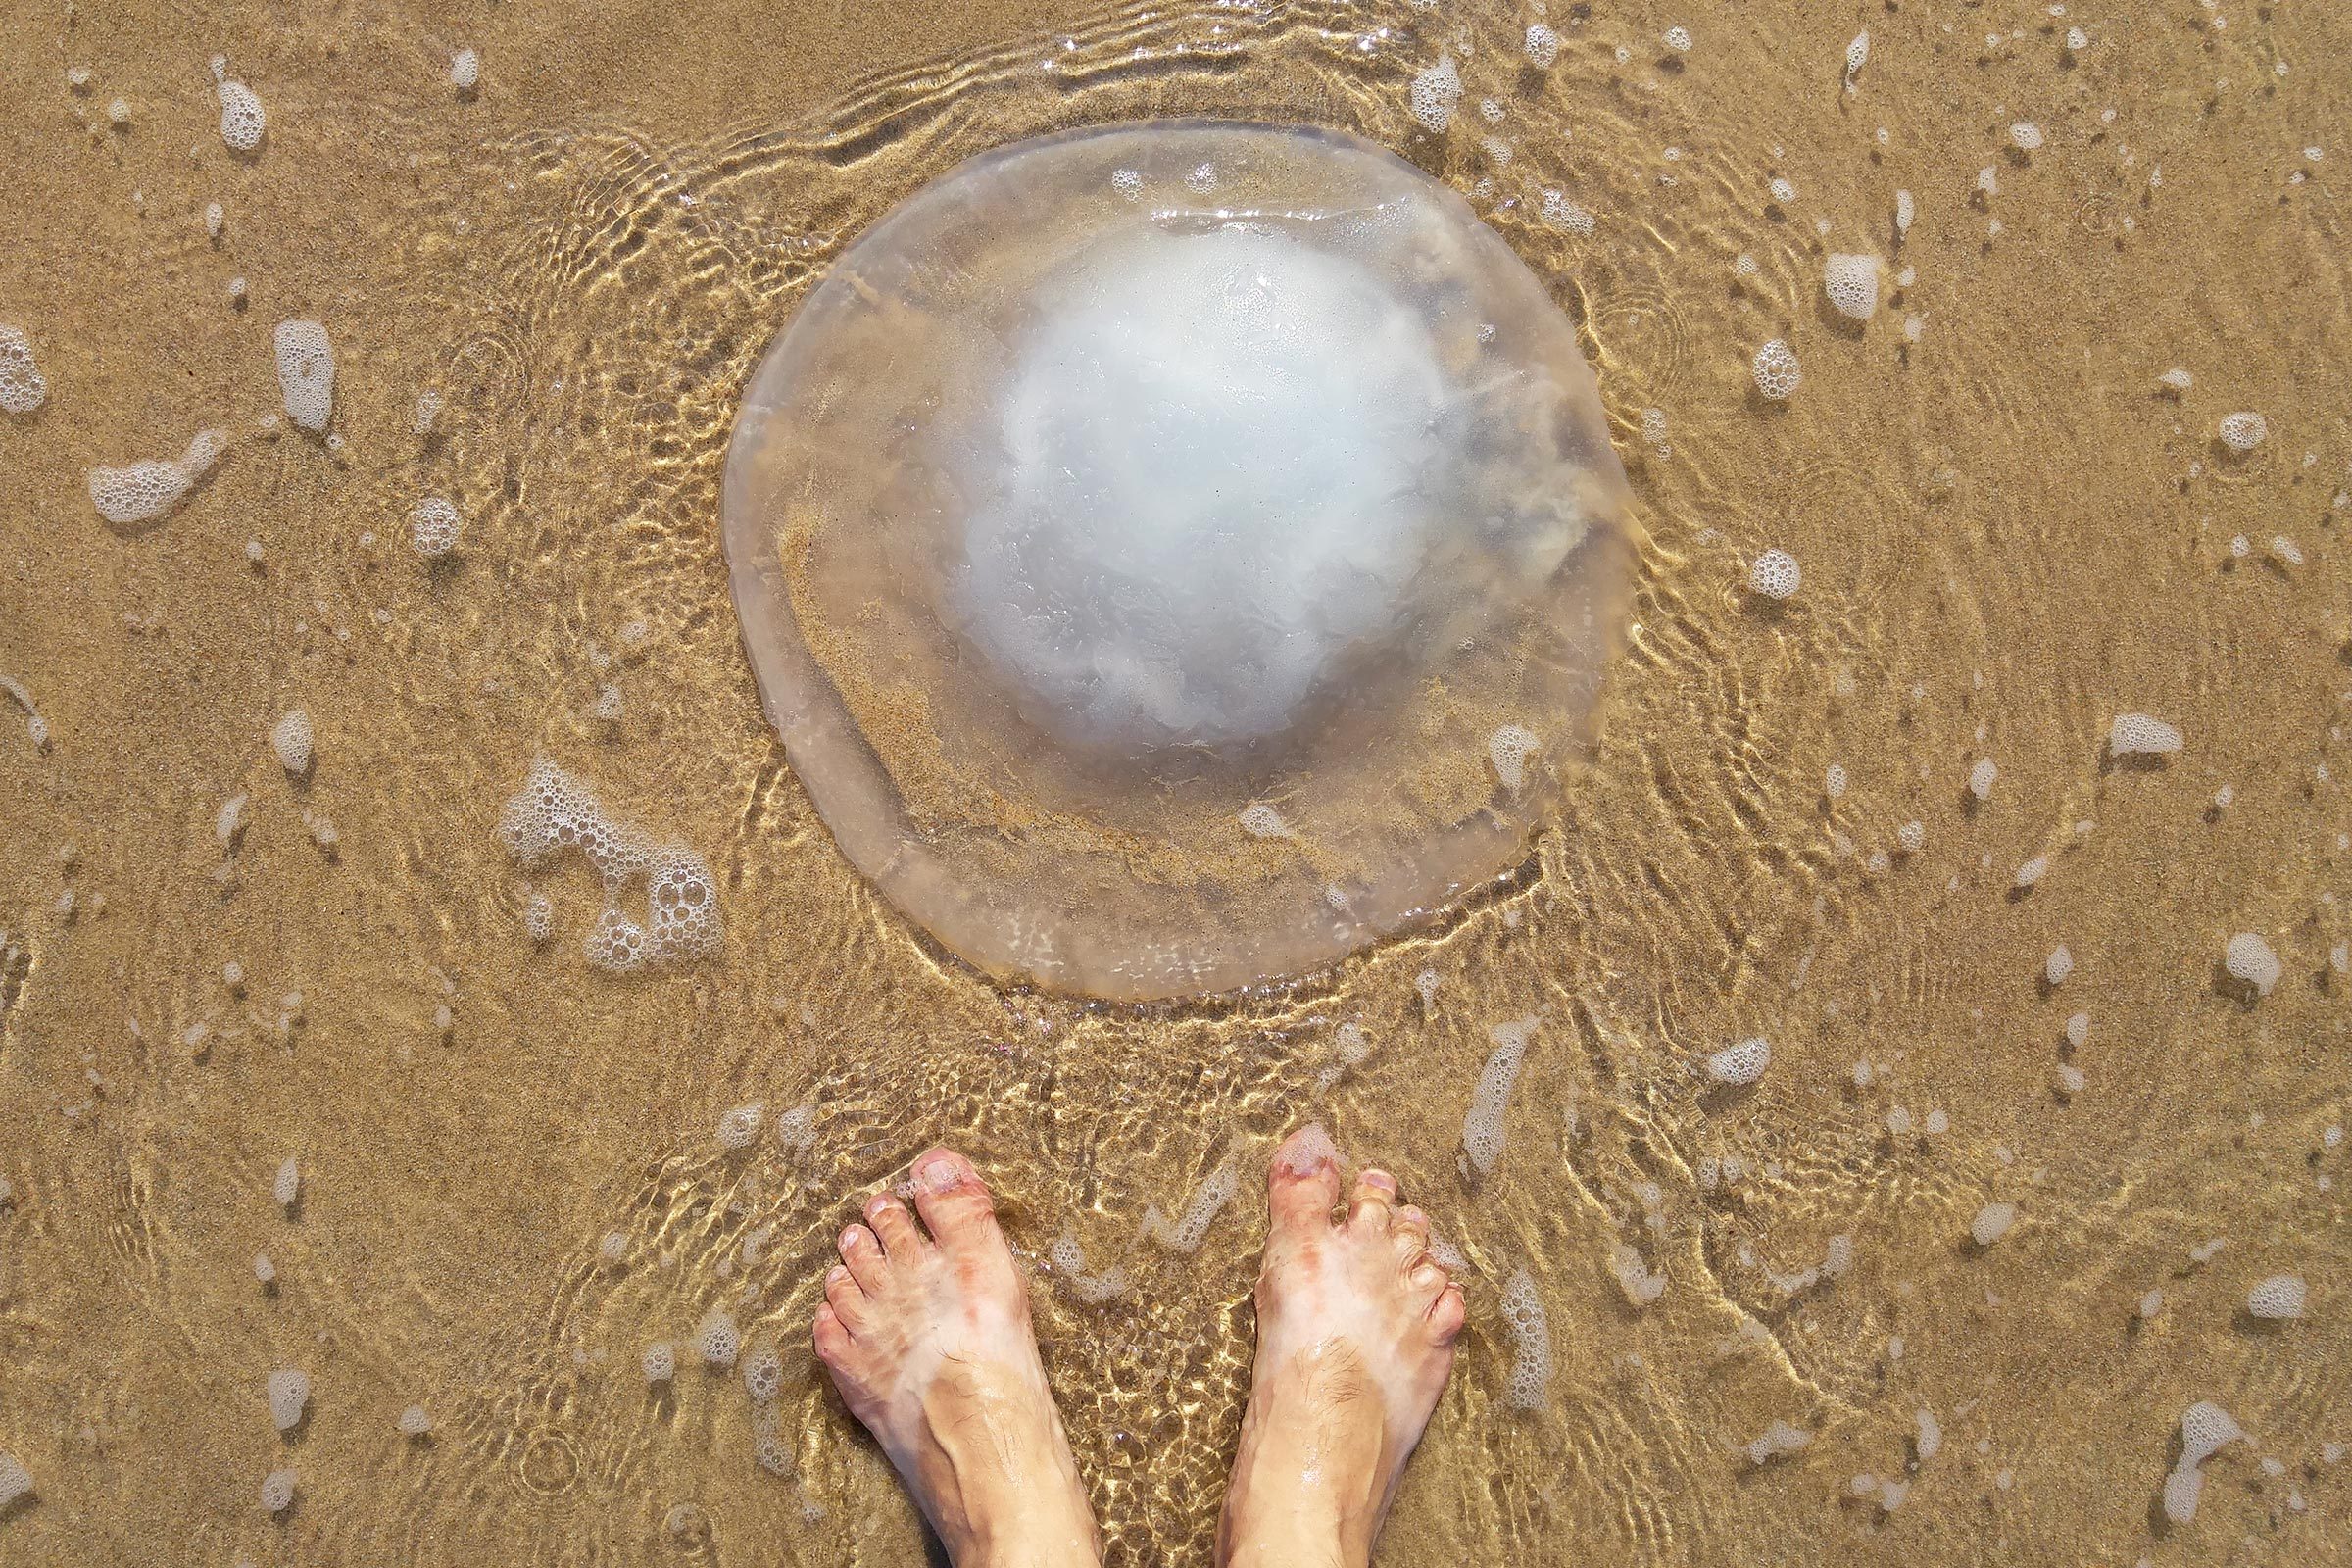 feet standing on sand next to jellyfish